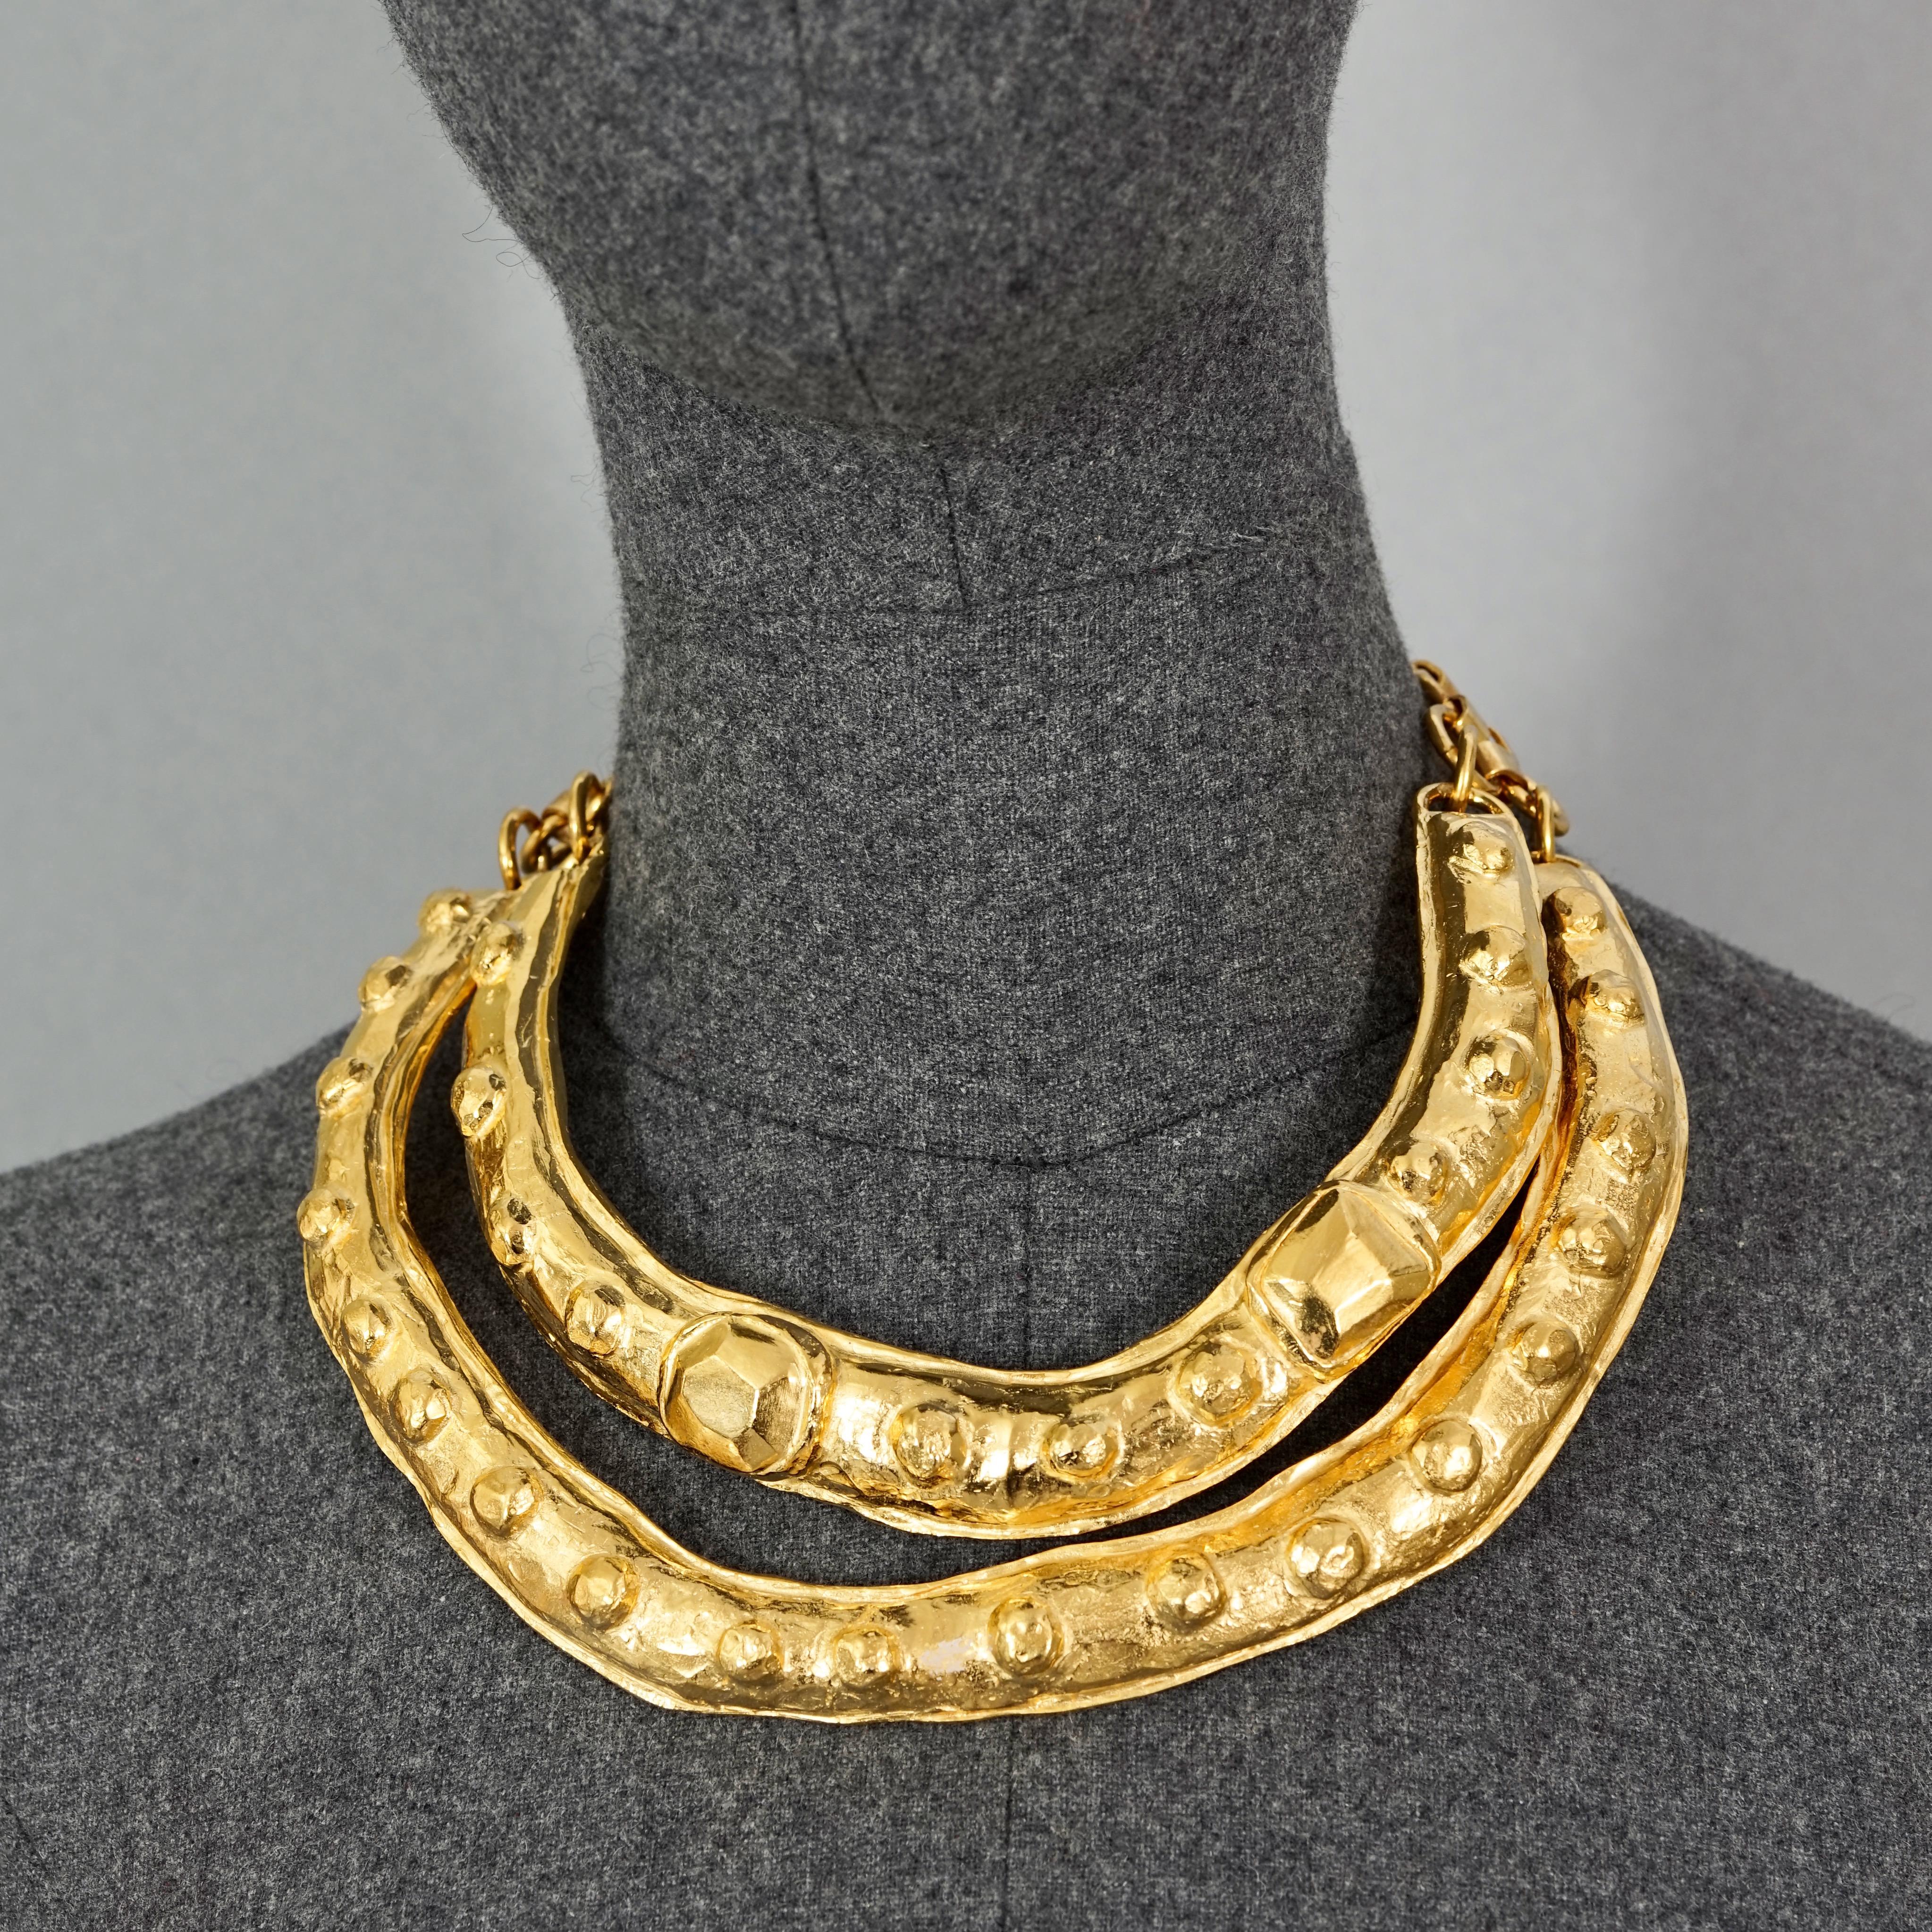 Vintage Runway CHRISTIAN LACROIX Double Layer Masai Rigid Gold Necklace

Measurements:
Height: 1.57 inches (4 cm)
Inner Circumference 12.99 inches (33 cm) 
Chain Extender: 5.90 inches (15 cm)

Features:
- 100% Authentic CHRISTIAN LACROIX.
- 2 layer